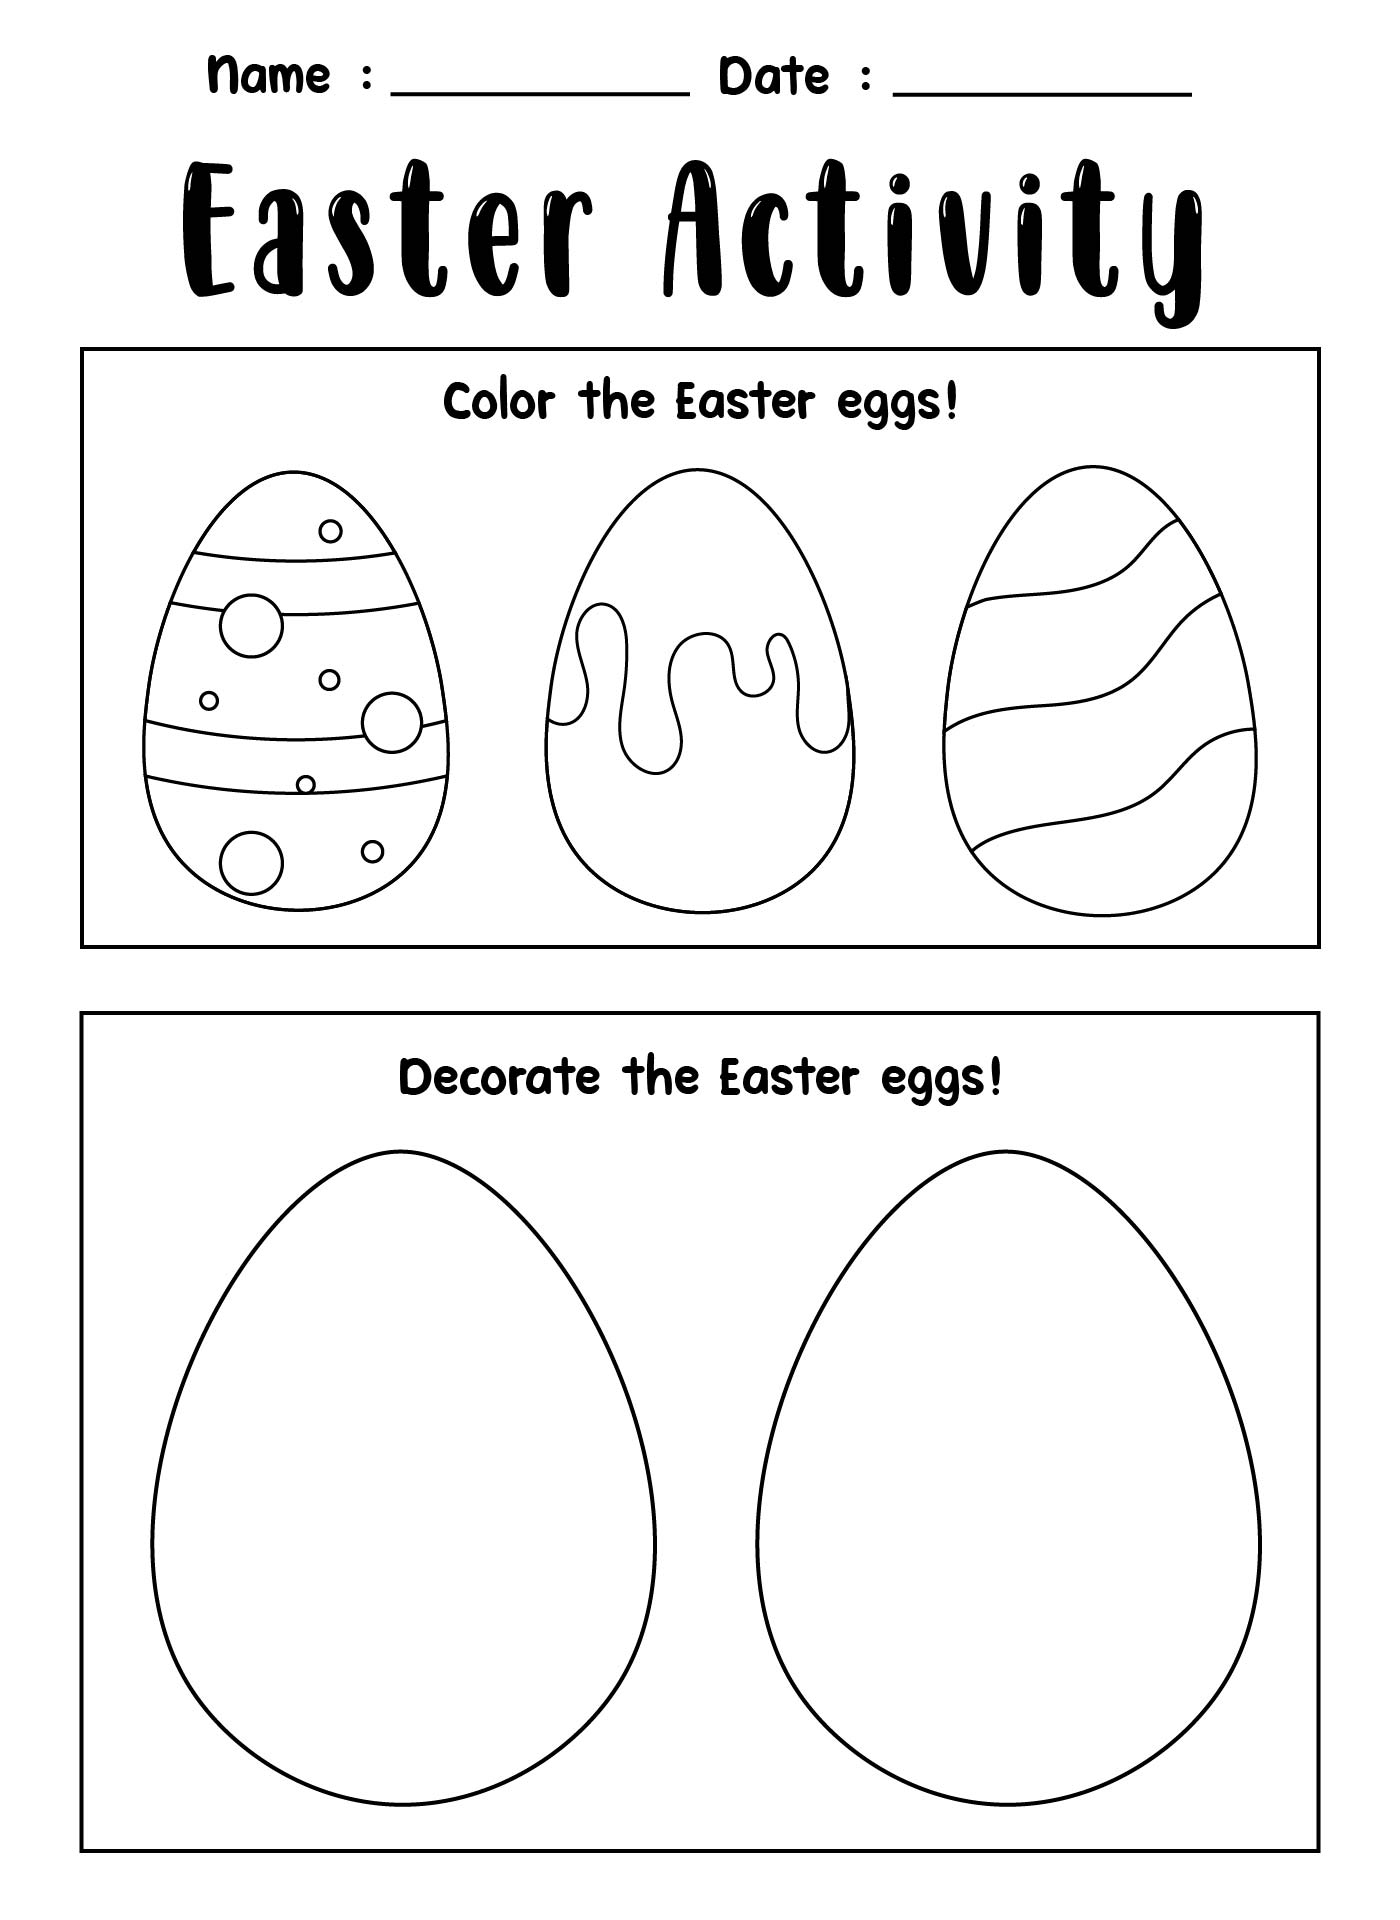 Easter Activity Sheets for Kids